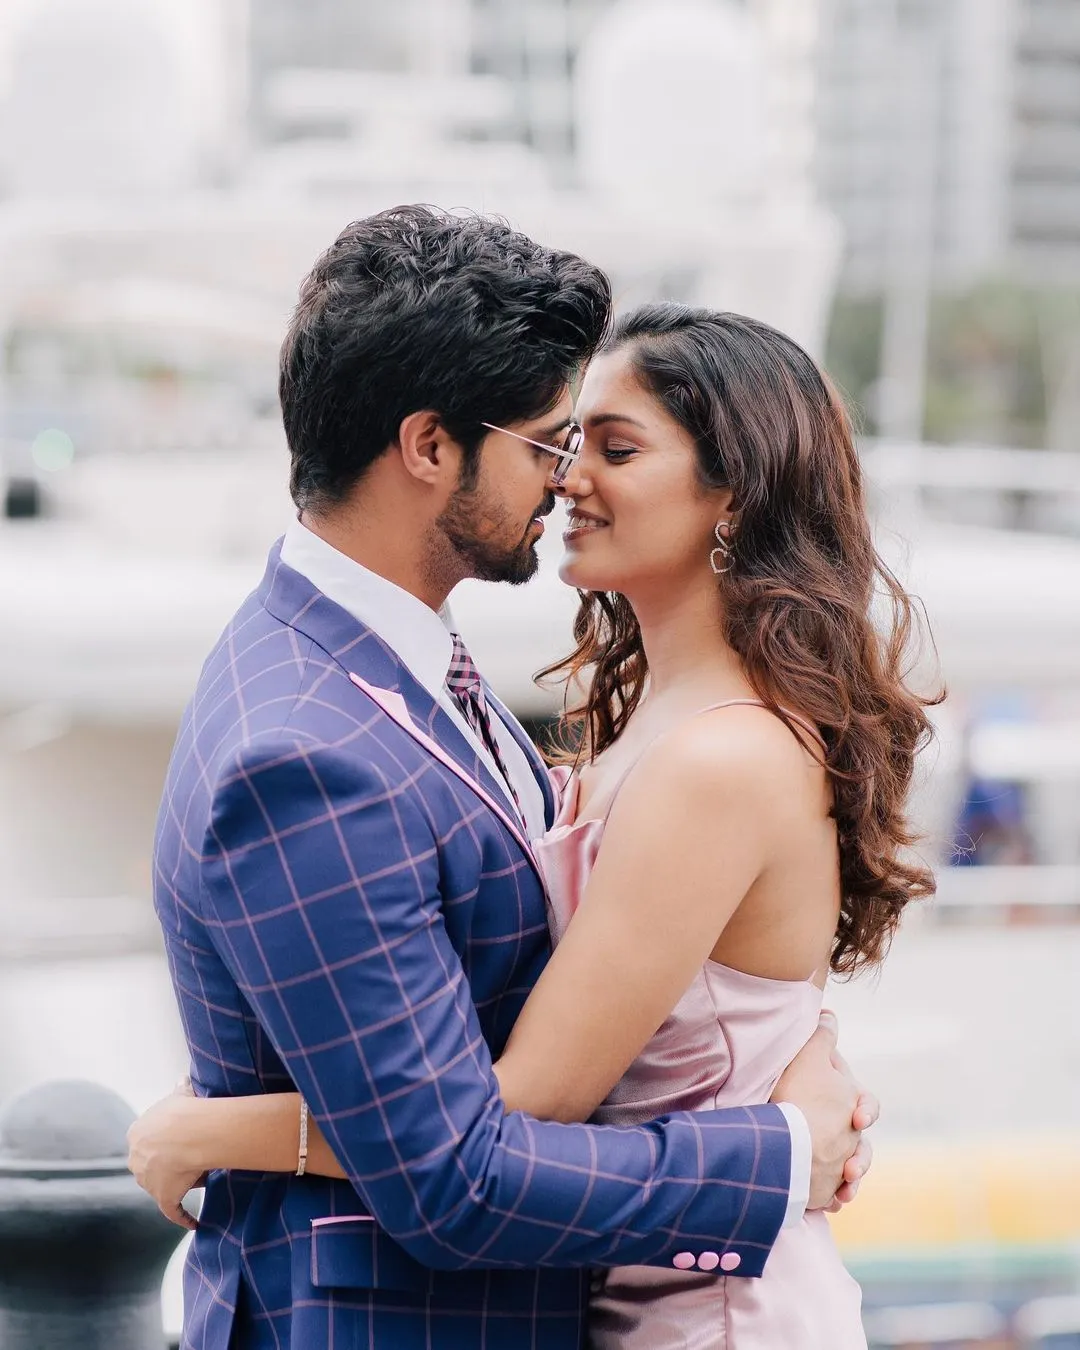 Tanuj Virwani got engaged secretly with his girlfriend Tanya Jacob, the actor shared the photo